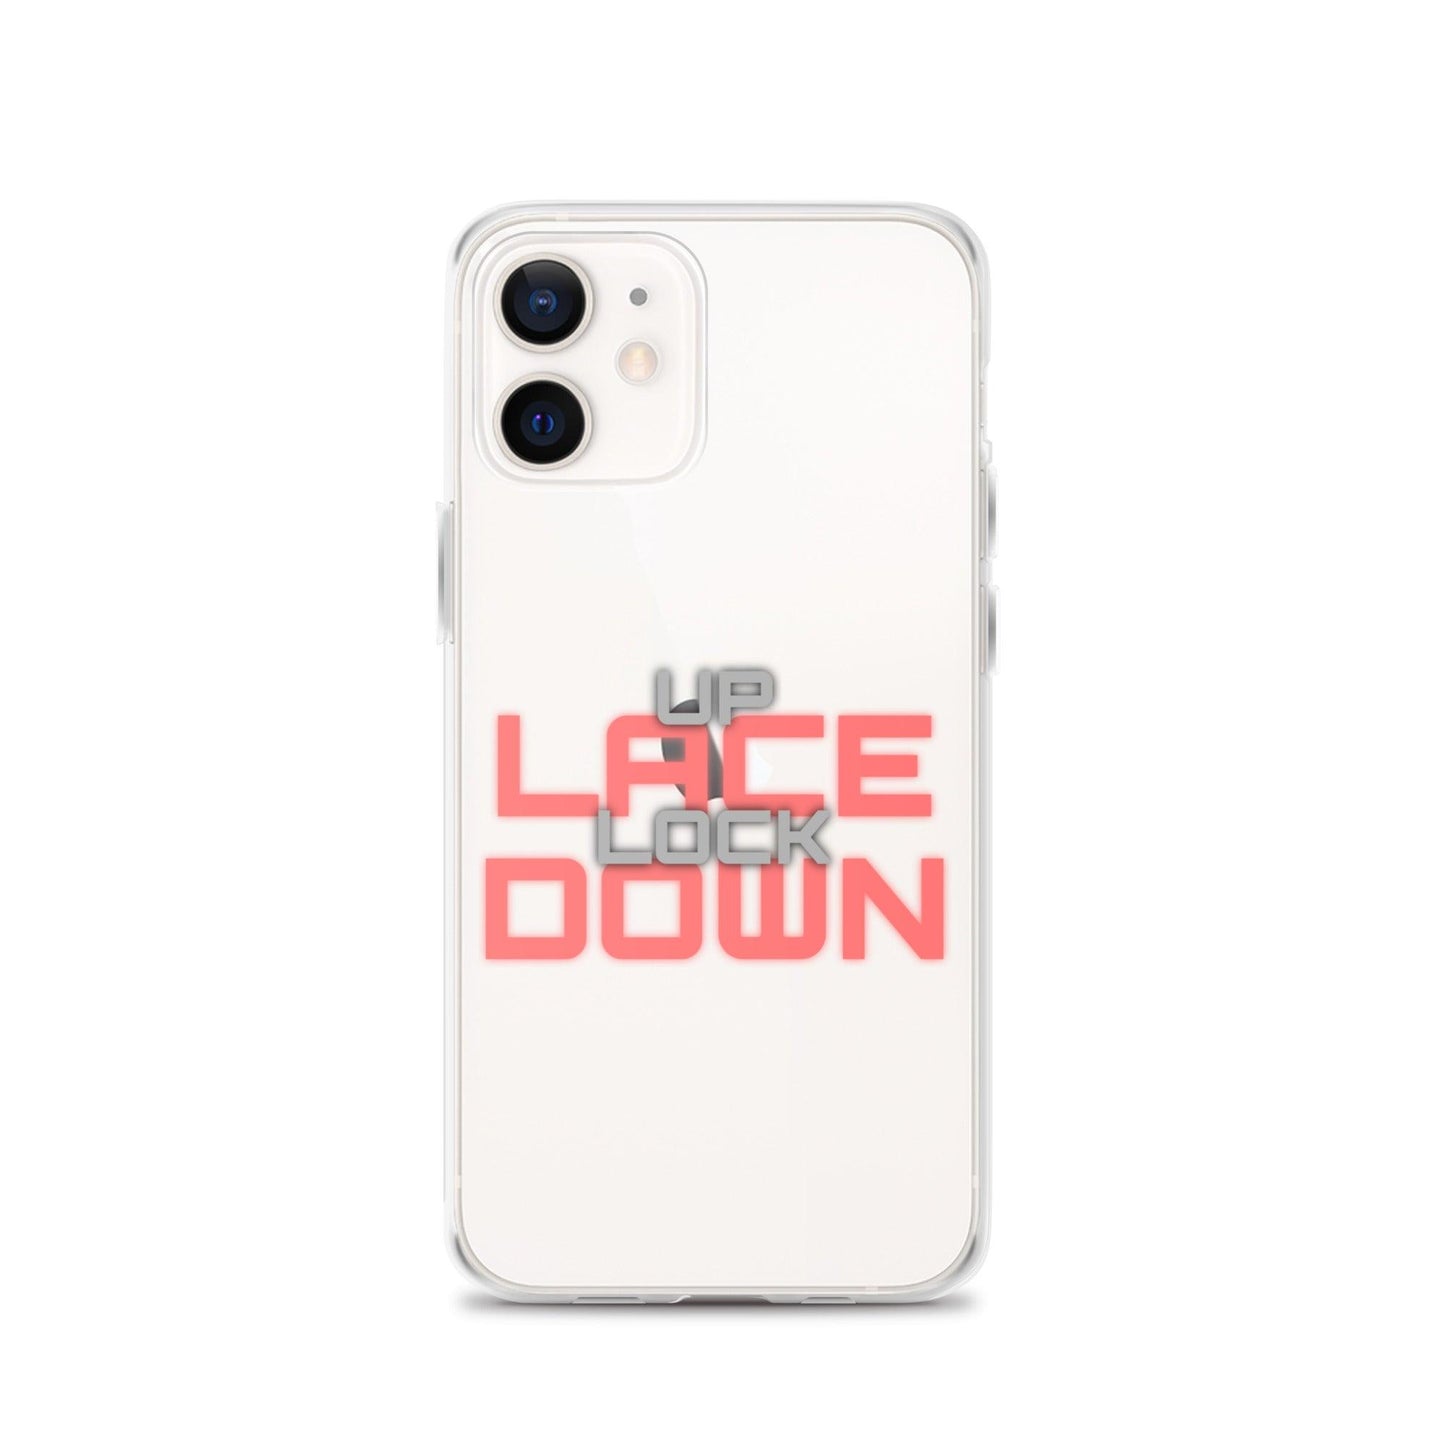 Angelo Sharpless "Lace Up Lock Down" iPhone Case - Fan Arch